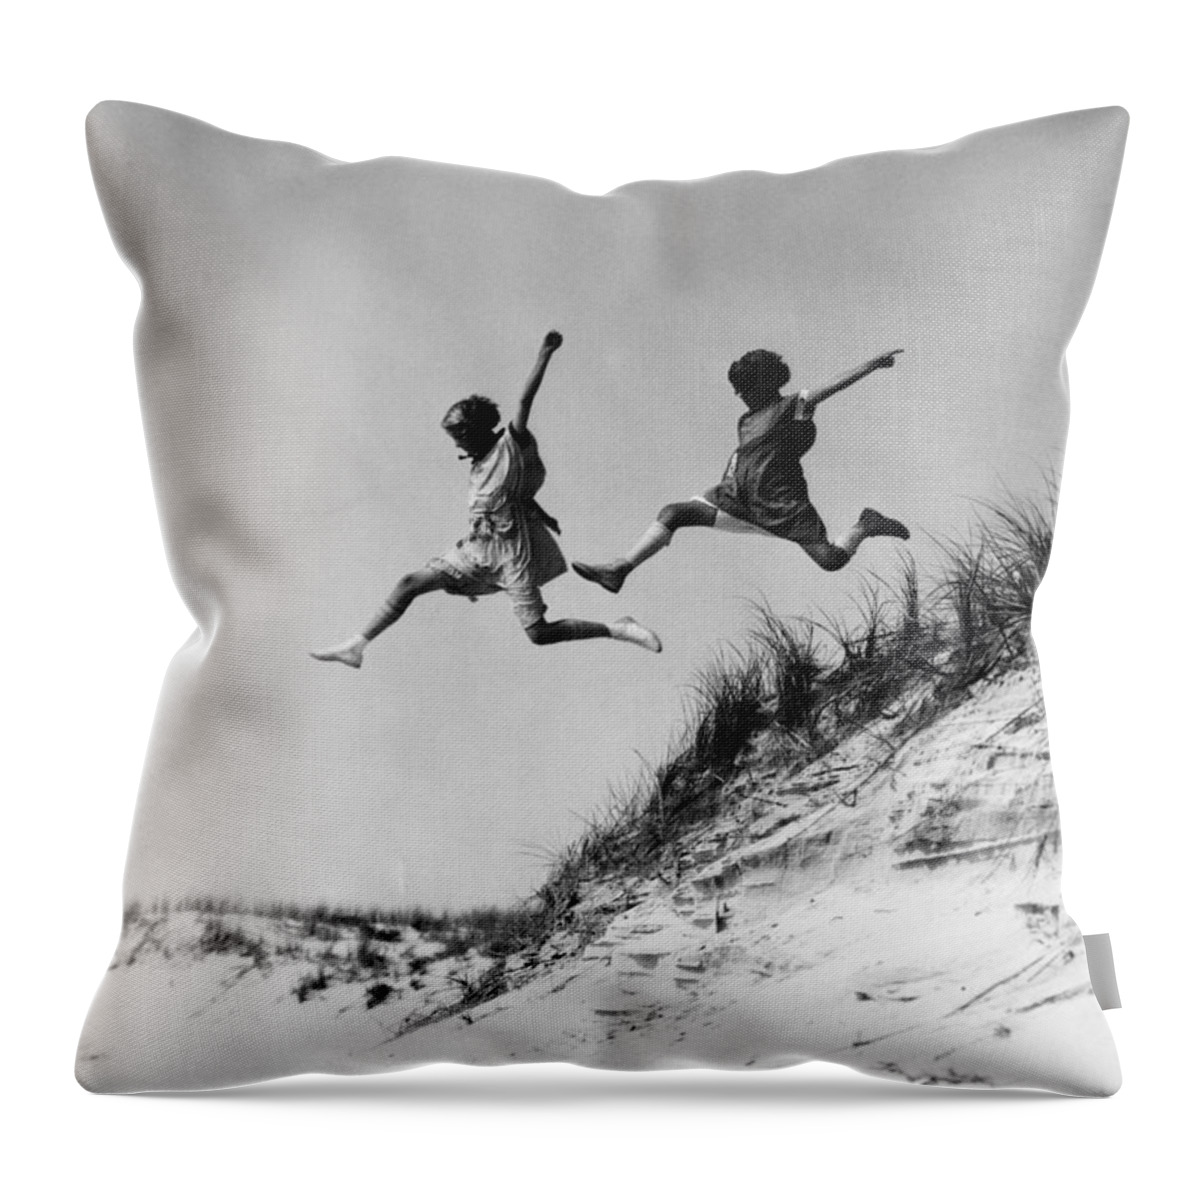 1920s Throw Pillow featuring the photograph Two Girls Leaping Off Sand Dune by H Armstrong Roberts and ClassicStock